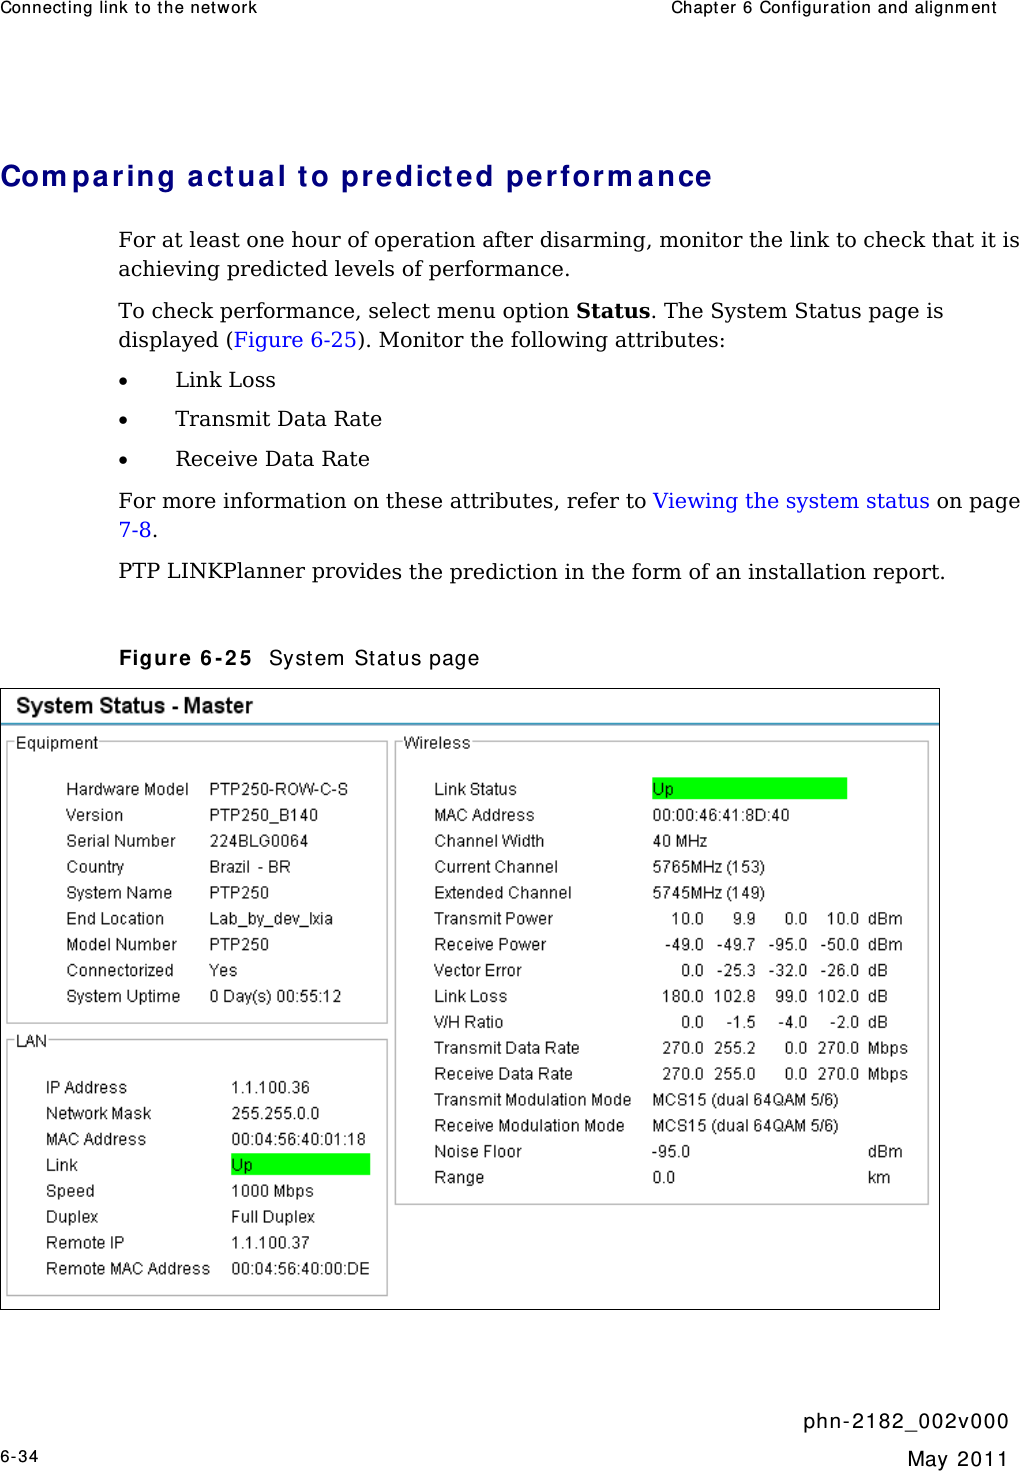 Connect ing link t o t he network  Chapt er 6 Configurat ion and alignm ent      phn- 2 182_002v 000 6-34  May 2011  Com paring a ct ual t o predict e d perform a nce For at least one hour of operation after disarming, monitor the link to check that it is achieving predicted levels of performance. To check performance, select menu option Status. The System Status page is displayed (Figure 6-25). Monitor the following attributes: • Link Loss • Transmit Data Rate • Receive Data Rate  For more information on these attributes, refer to Viewing the system status on page 7-8. PTP LINKPlanner provides the prediction in the form of an installation report.  Figure 6 - 2 5   Syst em  St at us page   